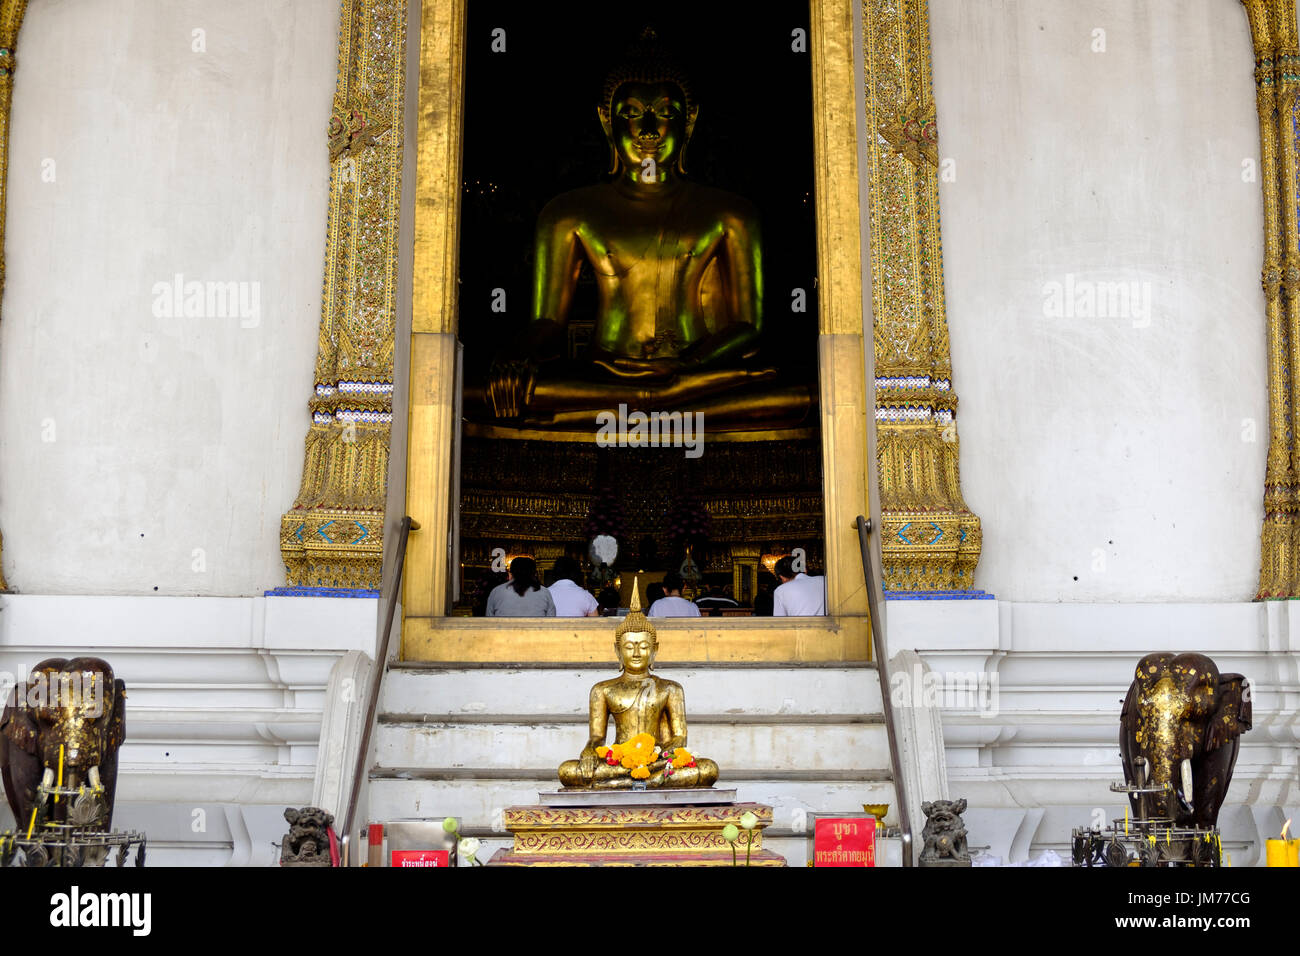 Buddha statue and people praying seen through the entrance to main prayer hall at Wat Suthat Thepwararam, a Buddhist temple in Bangkok, Thailand. Stock Photo